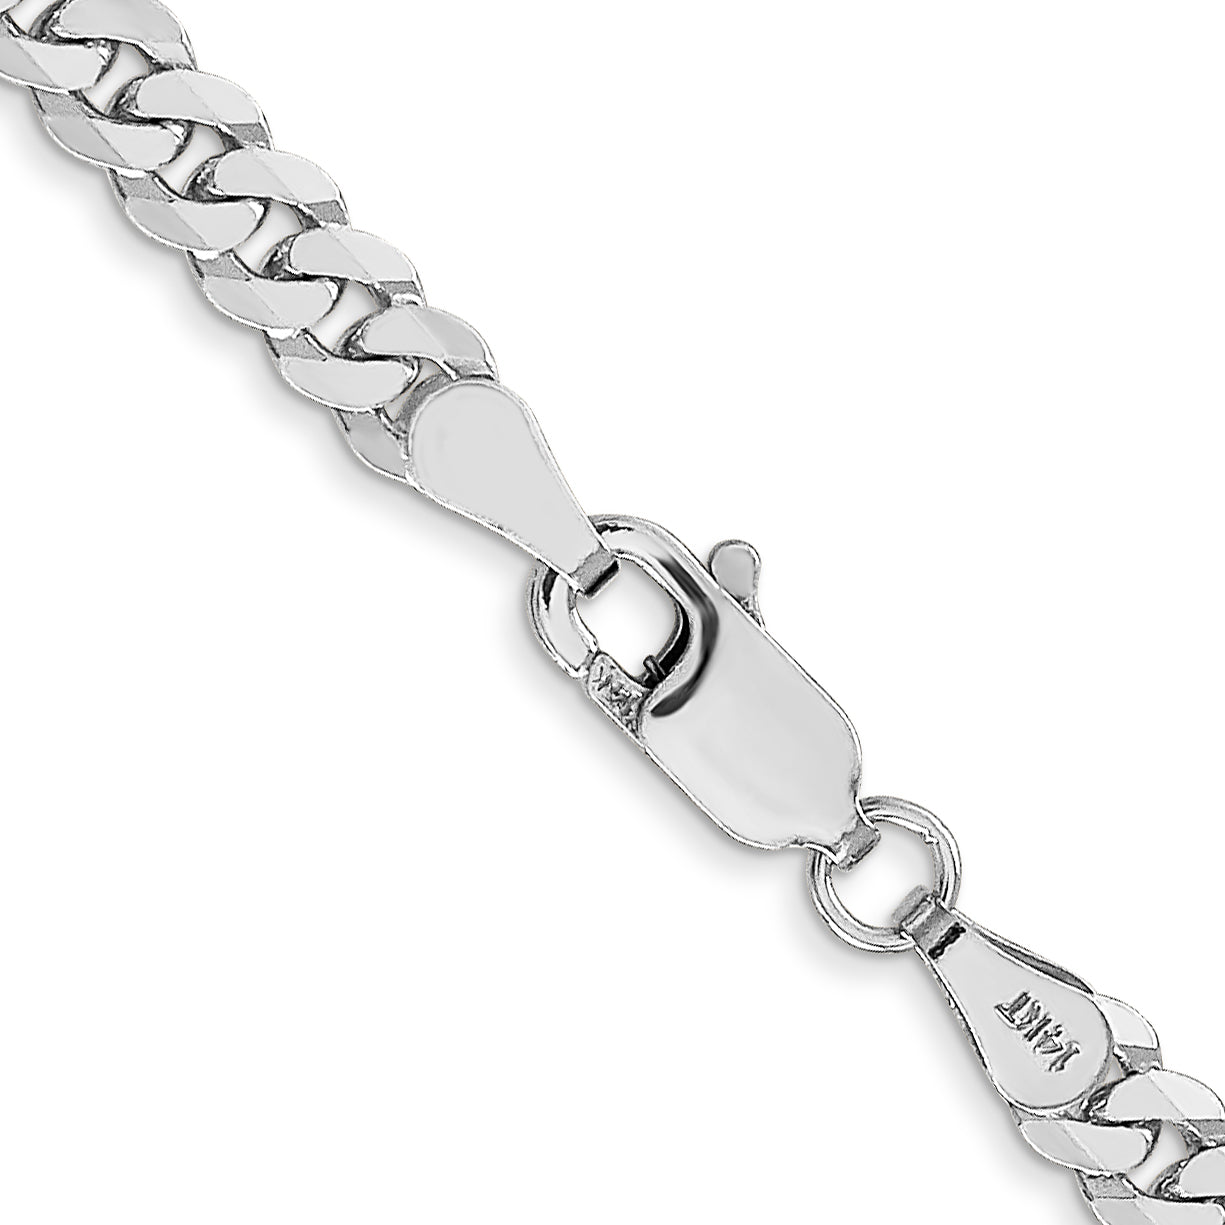 14K White Gold 16 inch 3.9mm Flat Beveled Curb with Lobster Clasp Chain